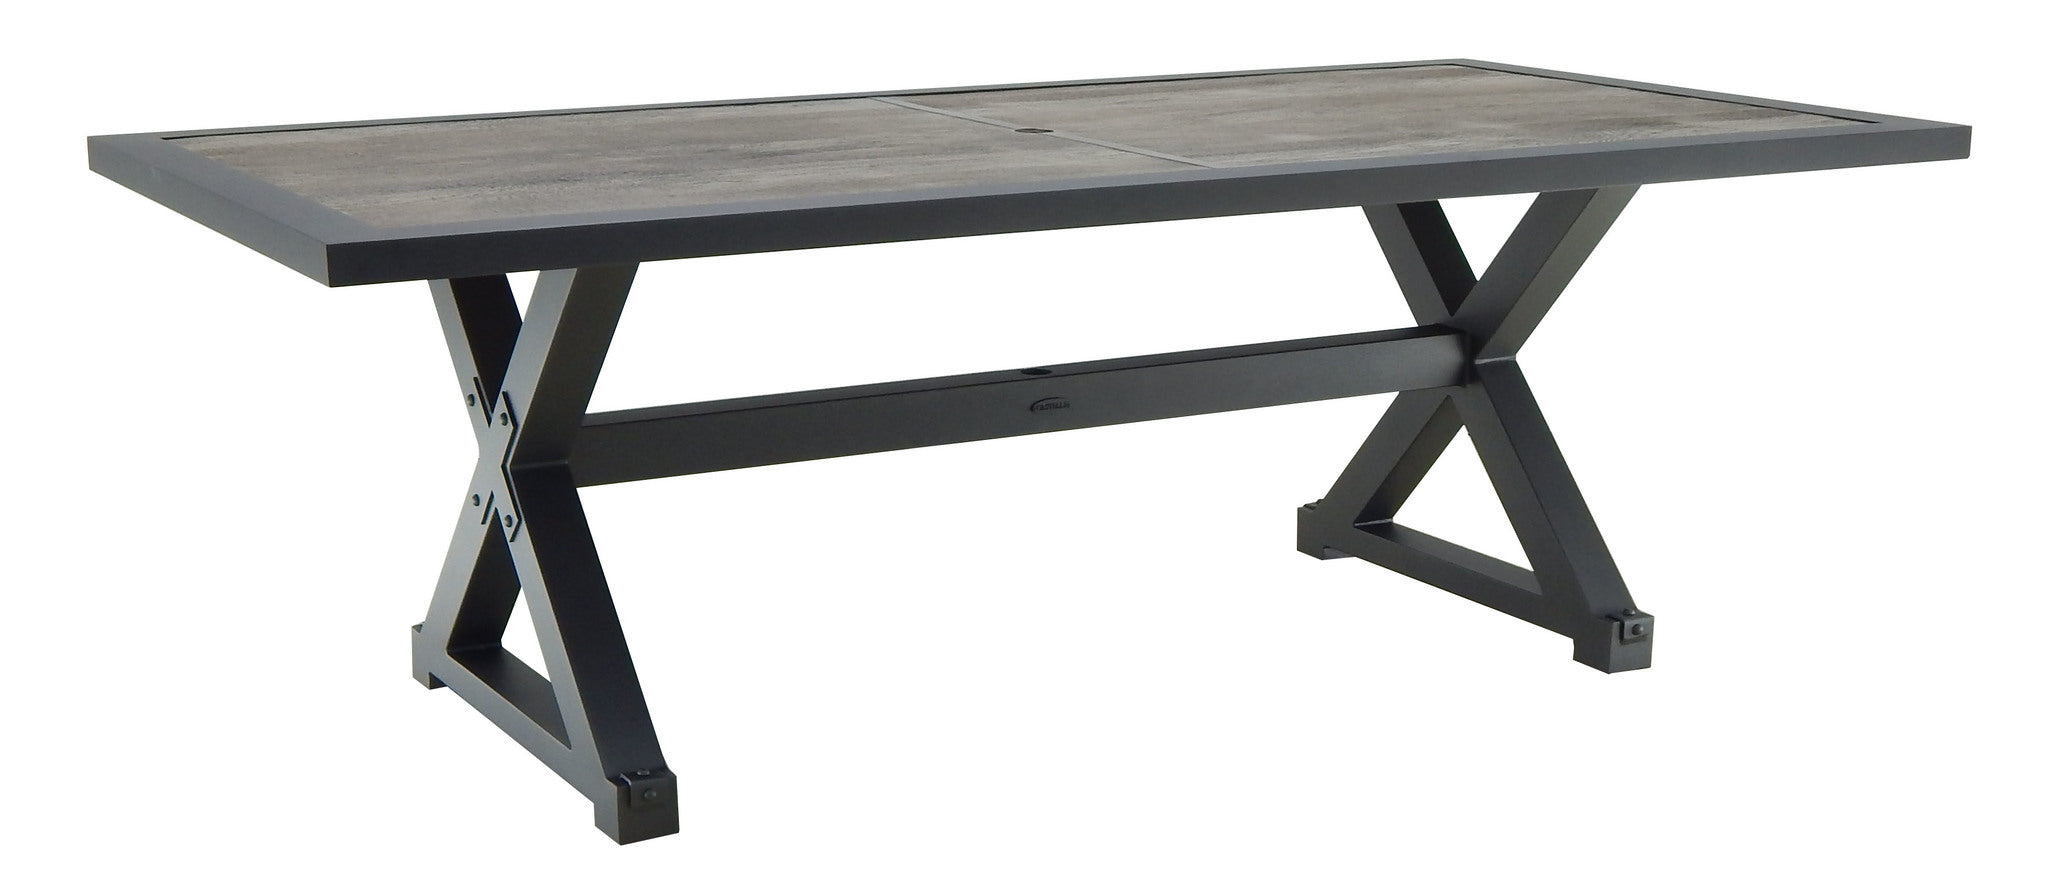 Castelle Oxford Rectangular Dining Table with Bronze Aluminum Slate Top and Weathered Wood Finish on Base 12038617